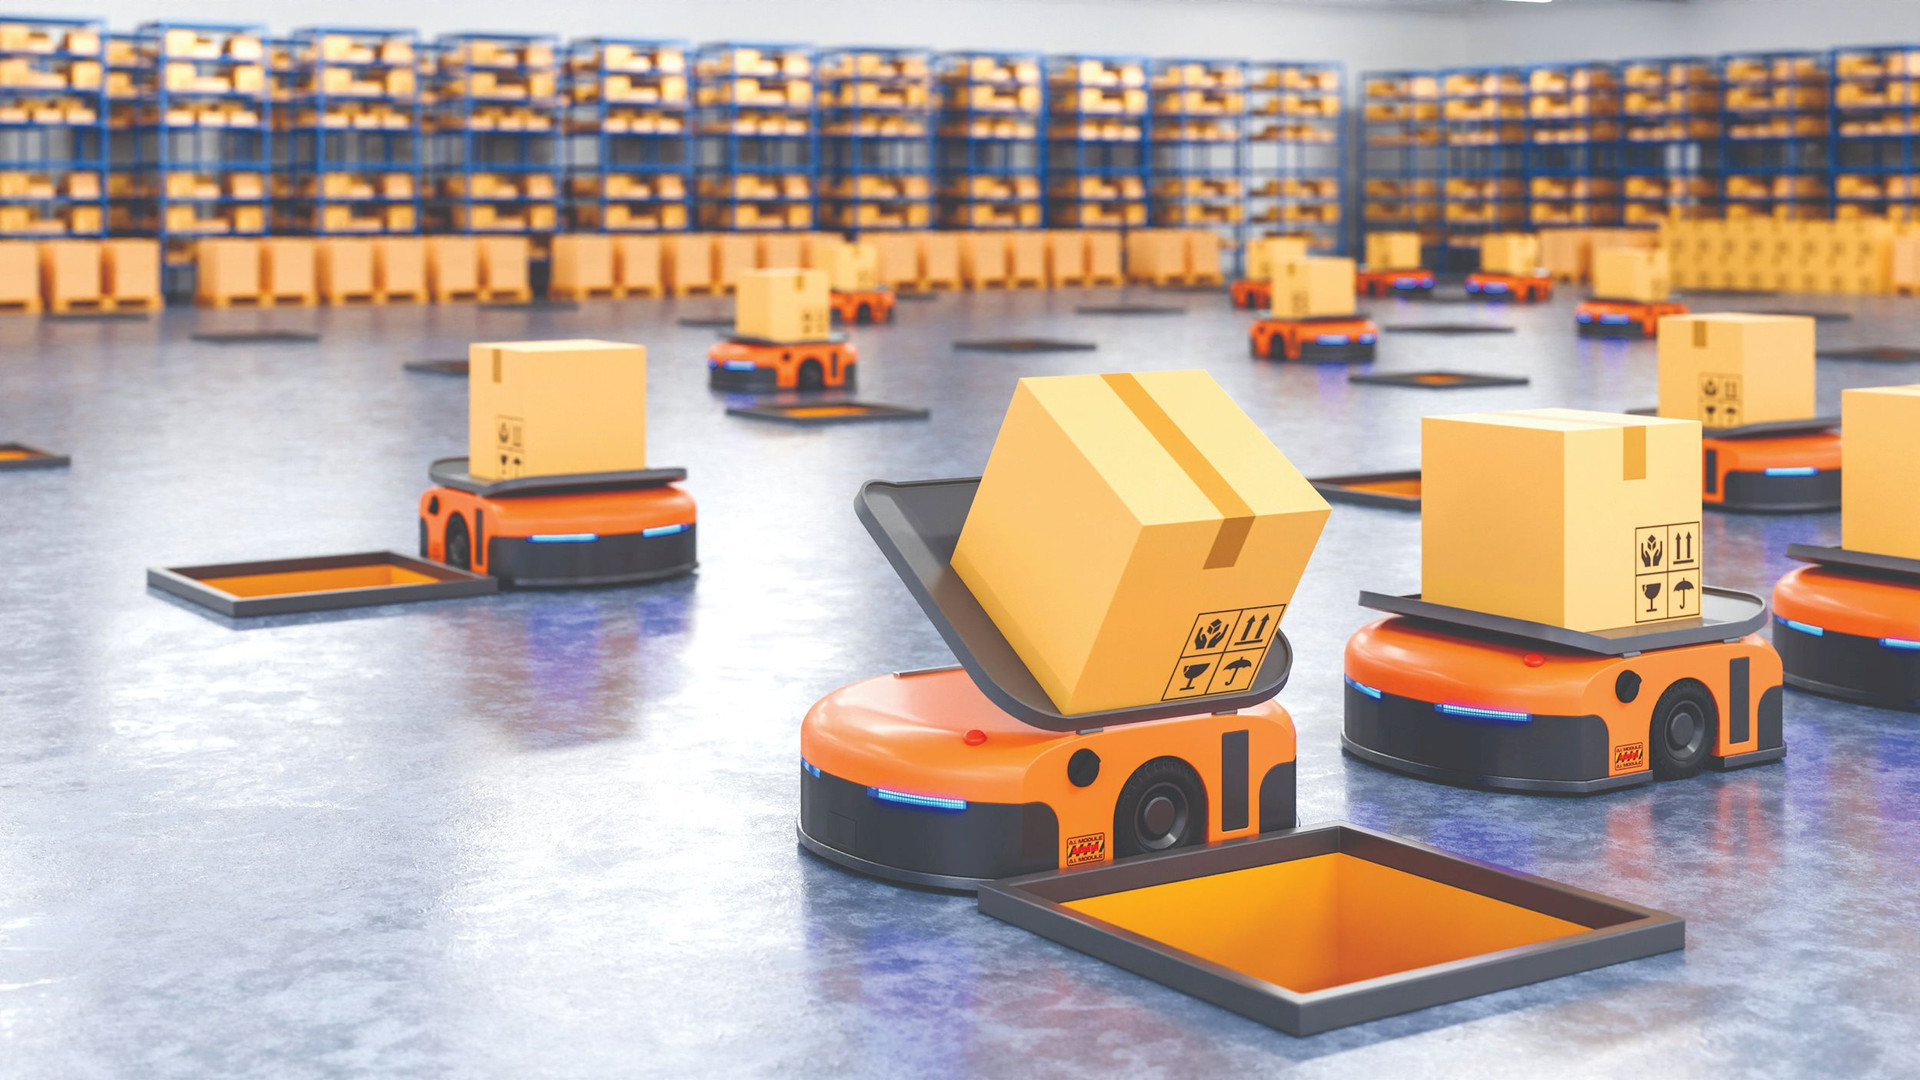 army-robots-efficiently-sorting-hundreds-parcels-per-hour-automated-guided-vehicle-agv-compressed.jpeg